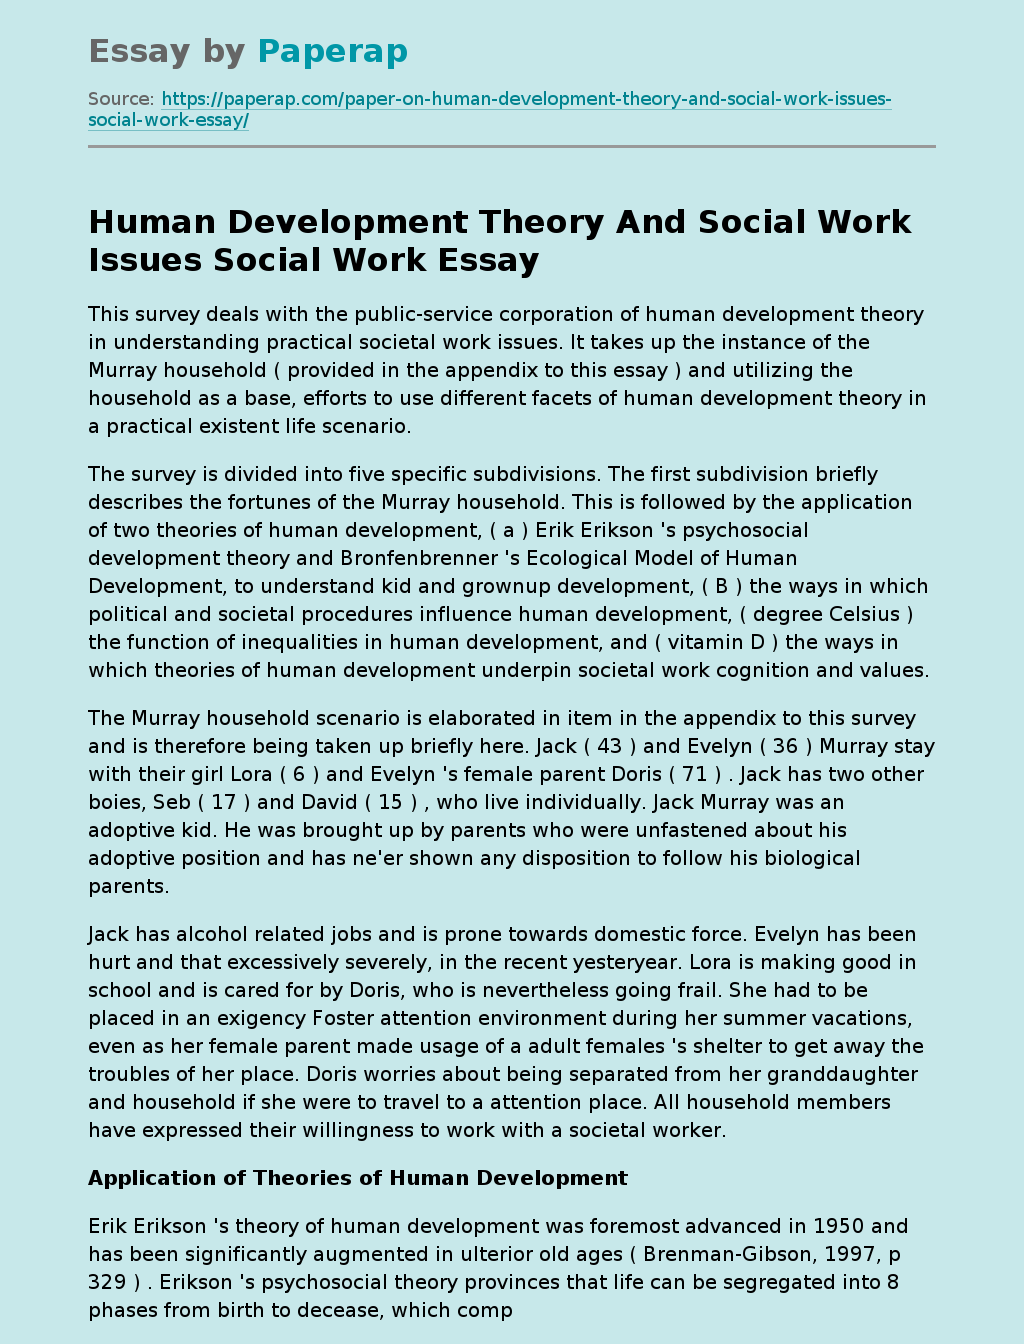 Human Development Theory And Social Work Issues Social Work